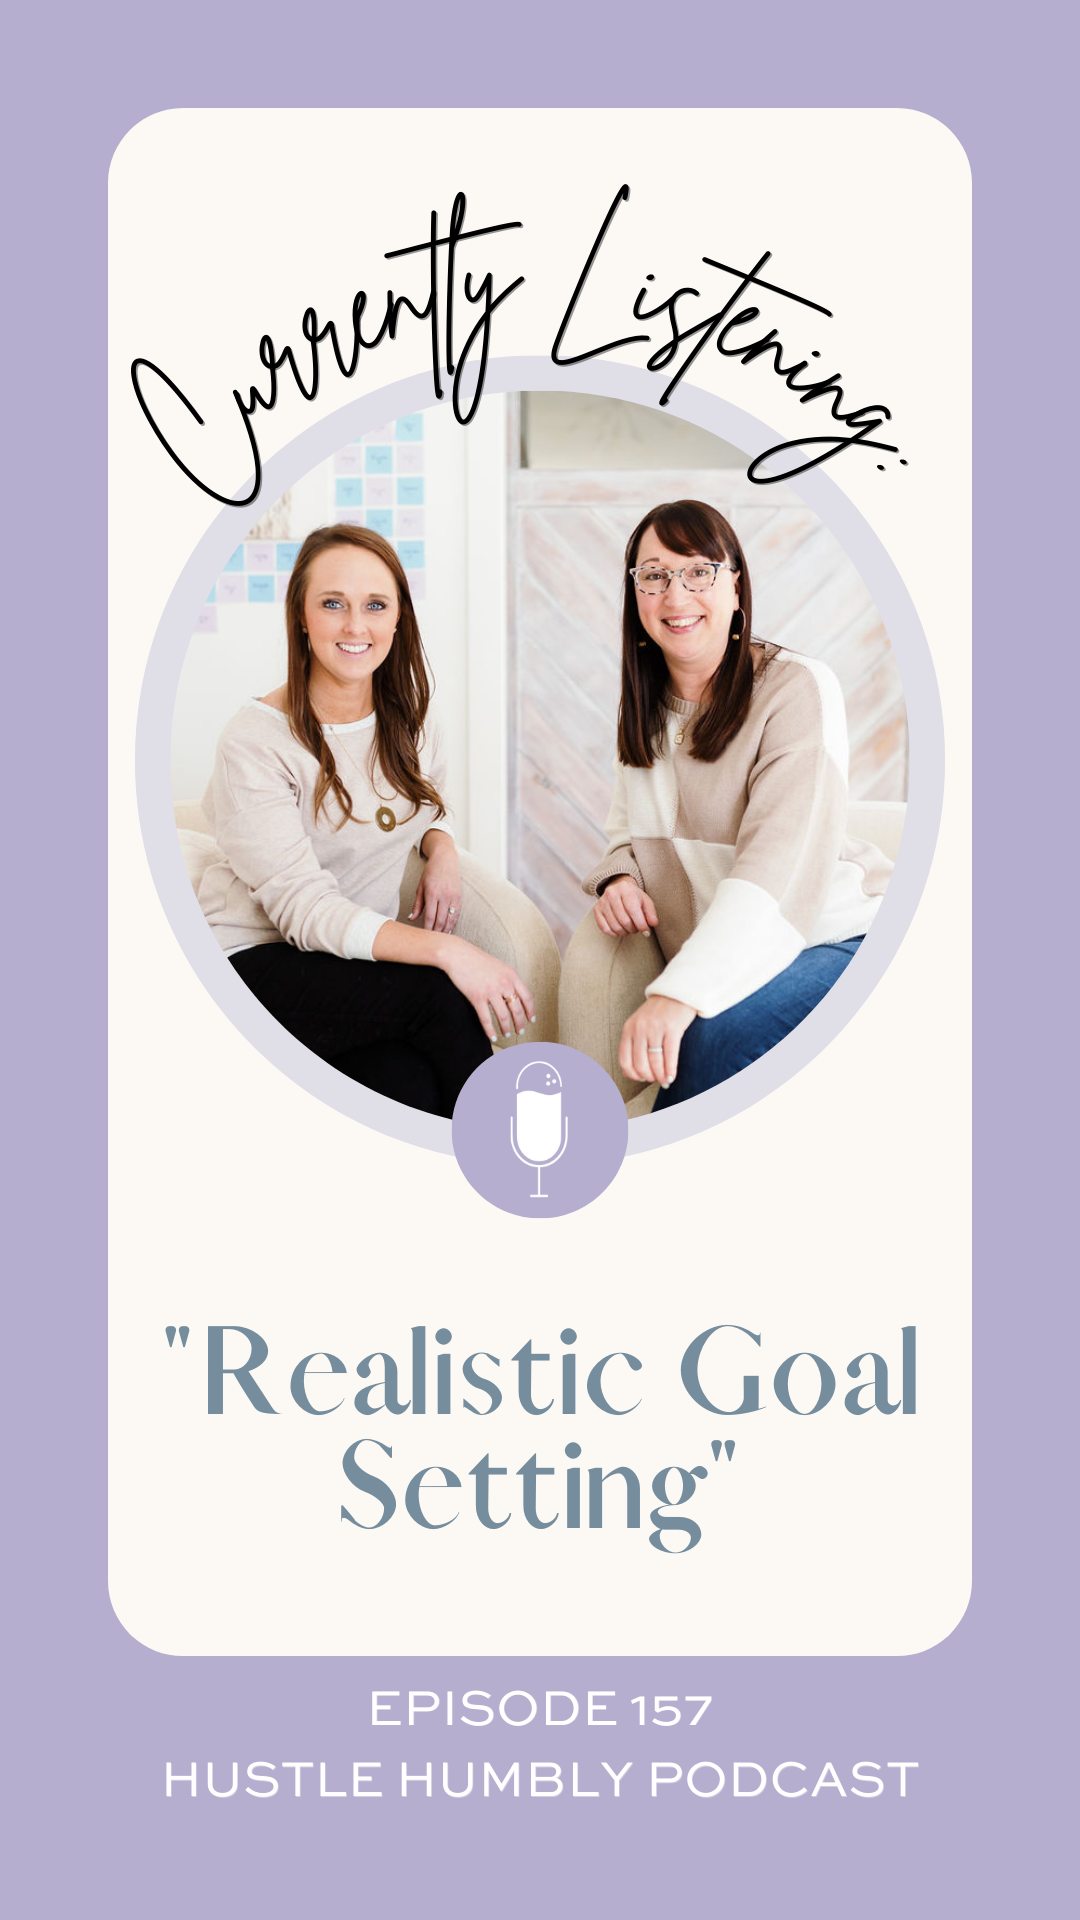 Hustle Humbly Podcast Episode 157: Realistic Goal Setting